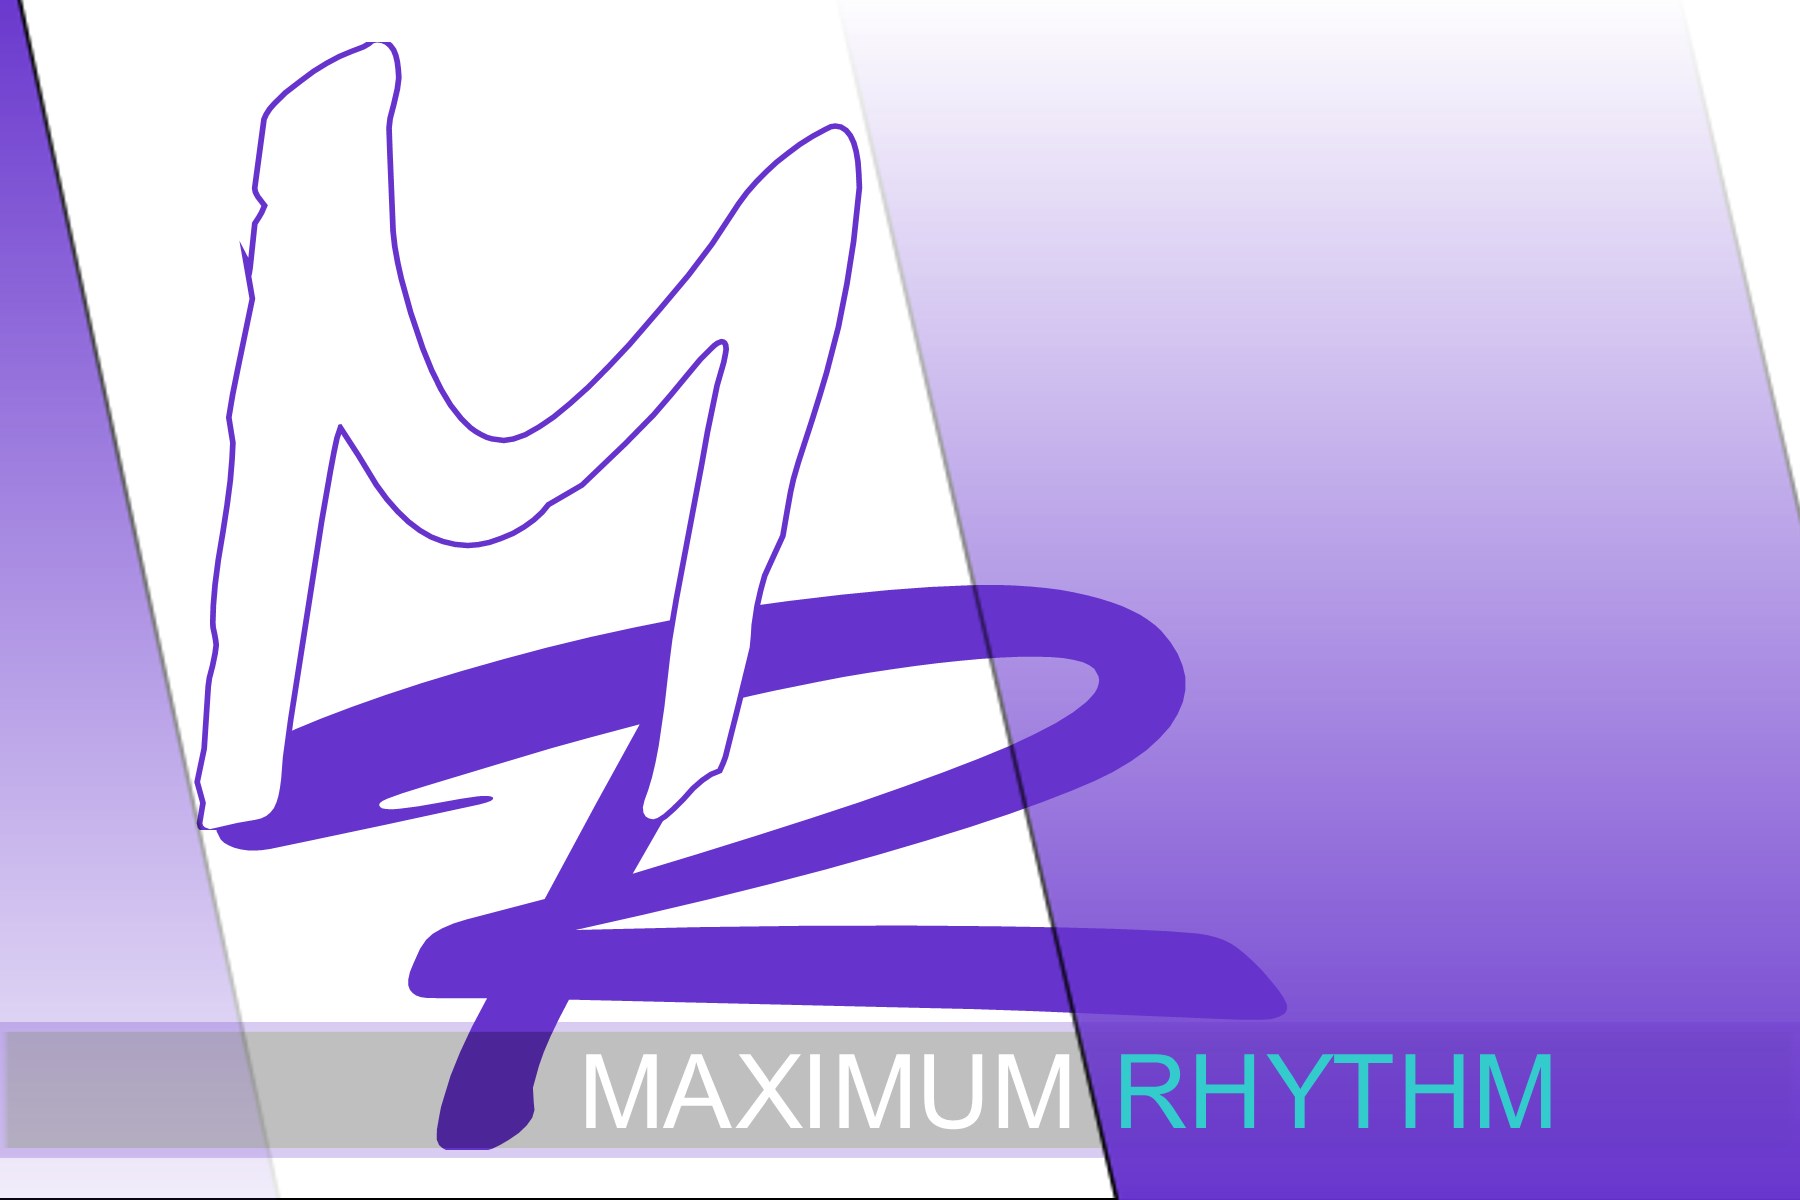 Come experience these mini mixes and more at Maximum Rhythm